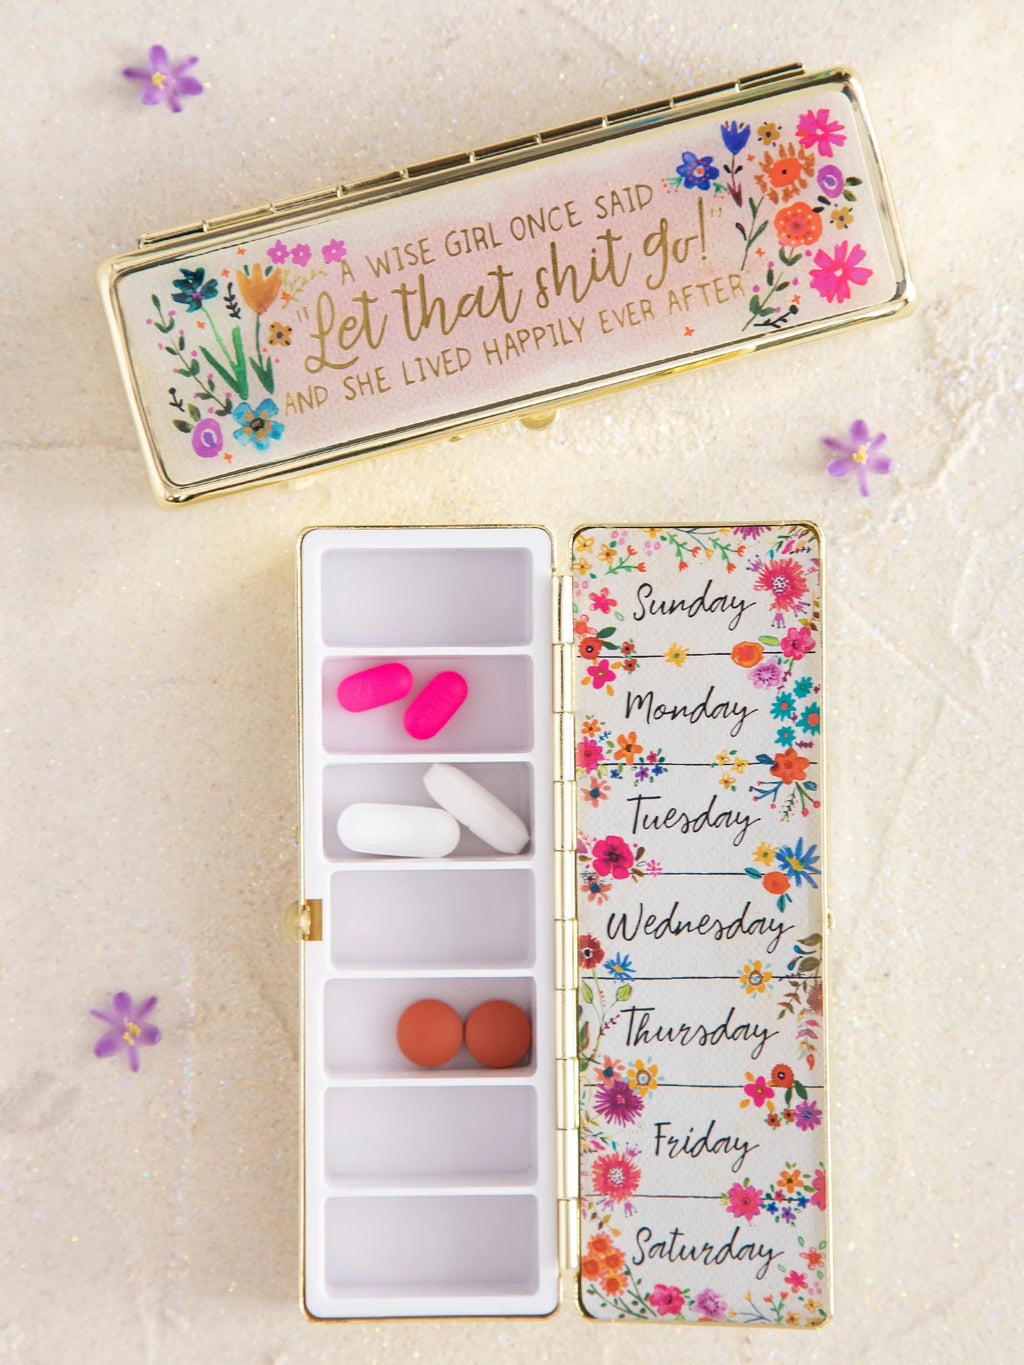 Daily Pill Box A Wise Girl